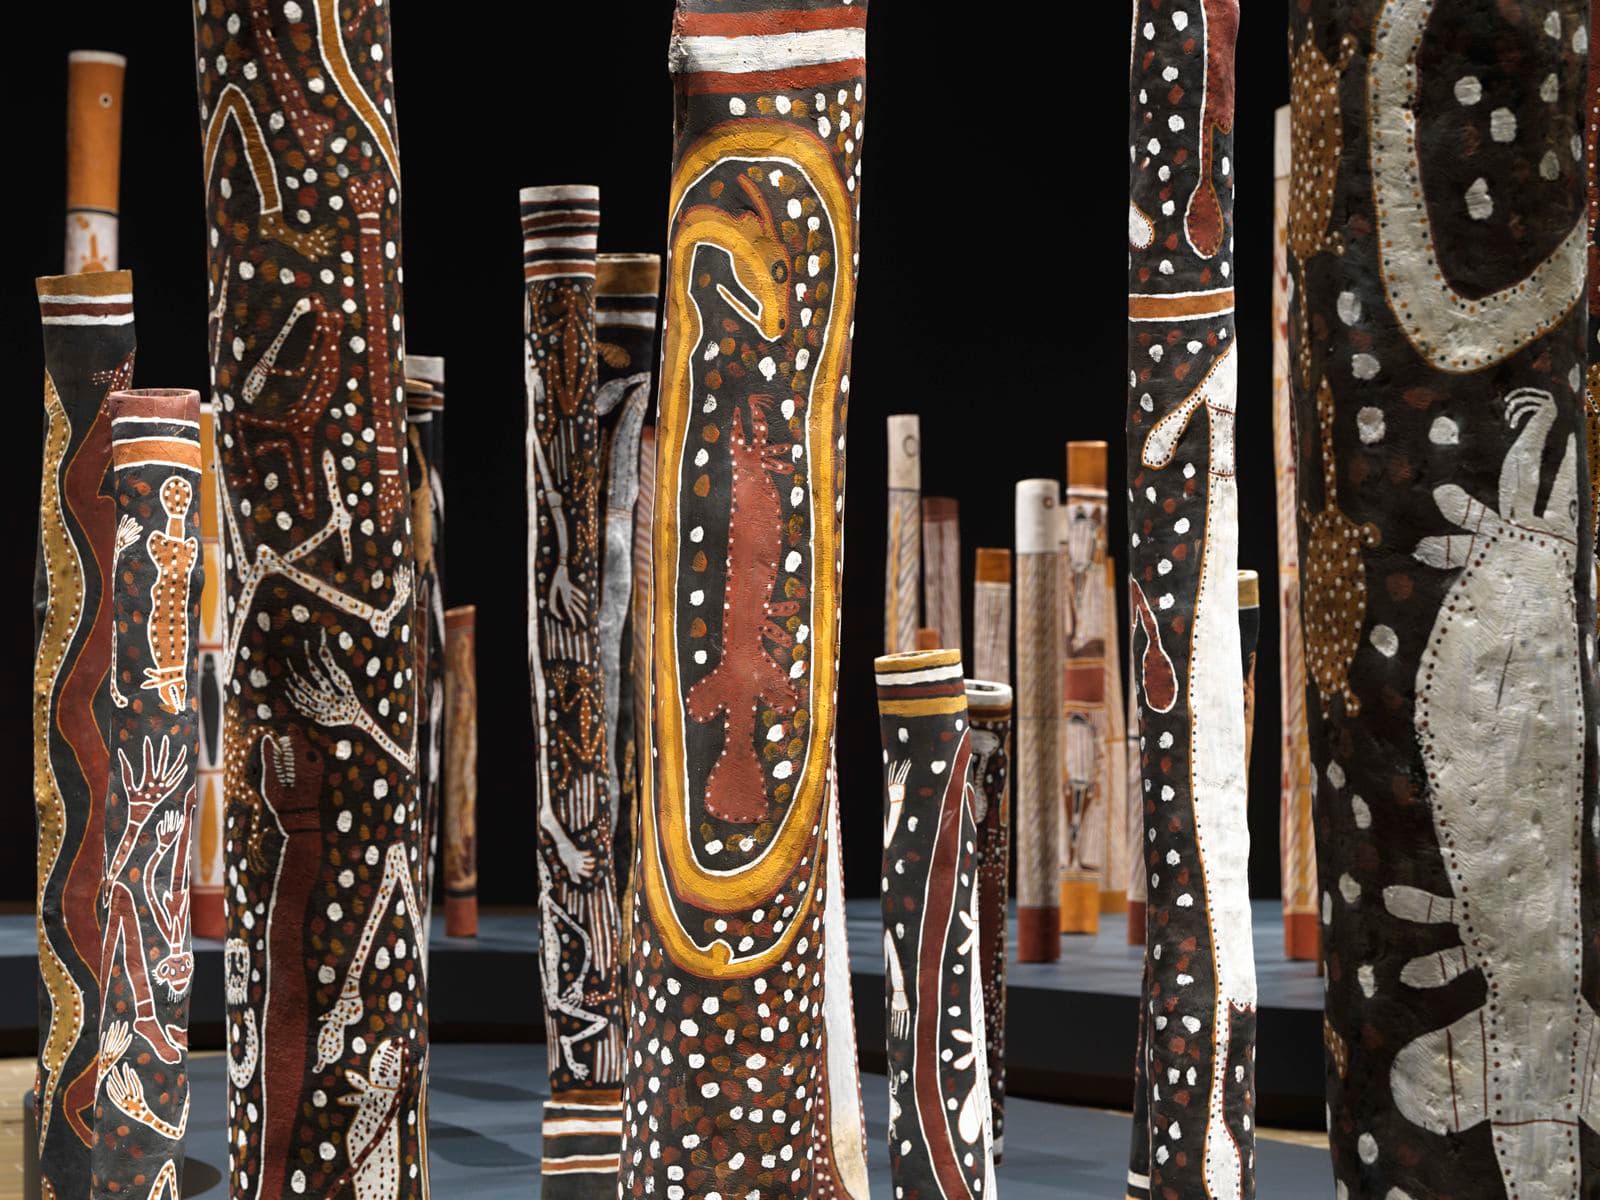 First Nations work of art detail of painted black hollow logs on display in dark exhibition space